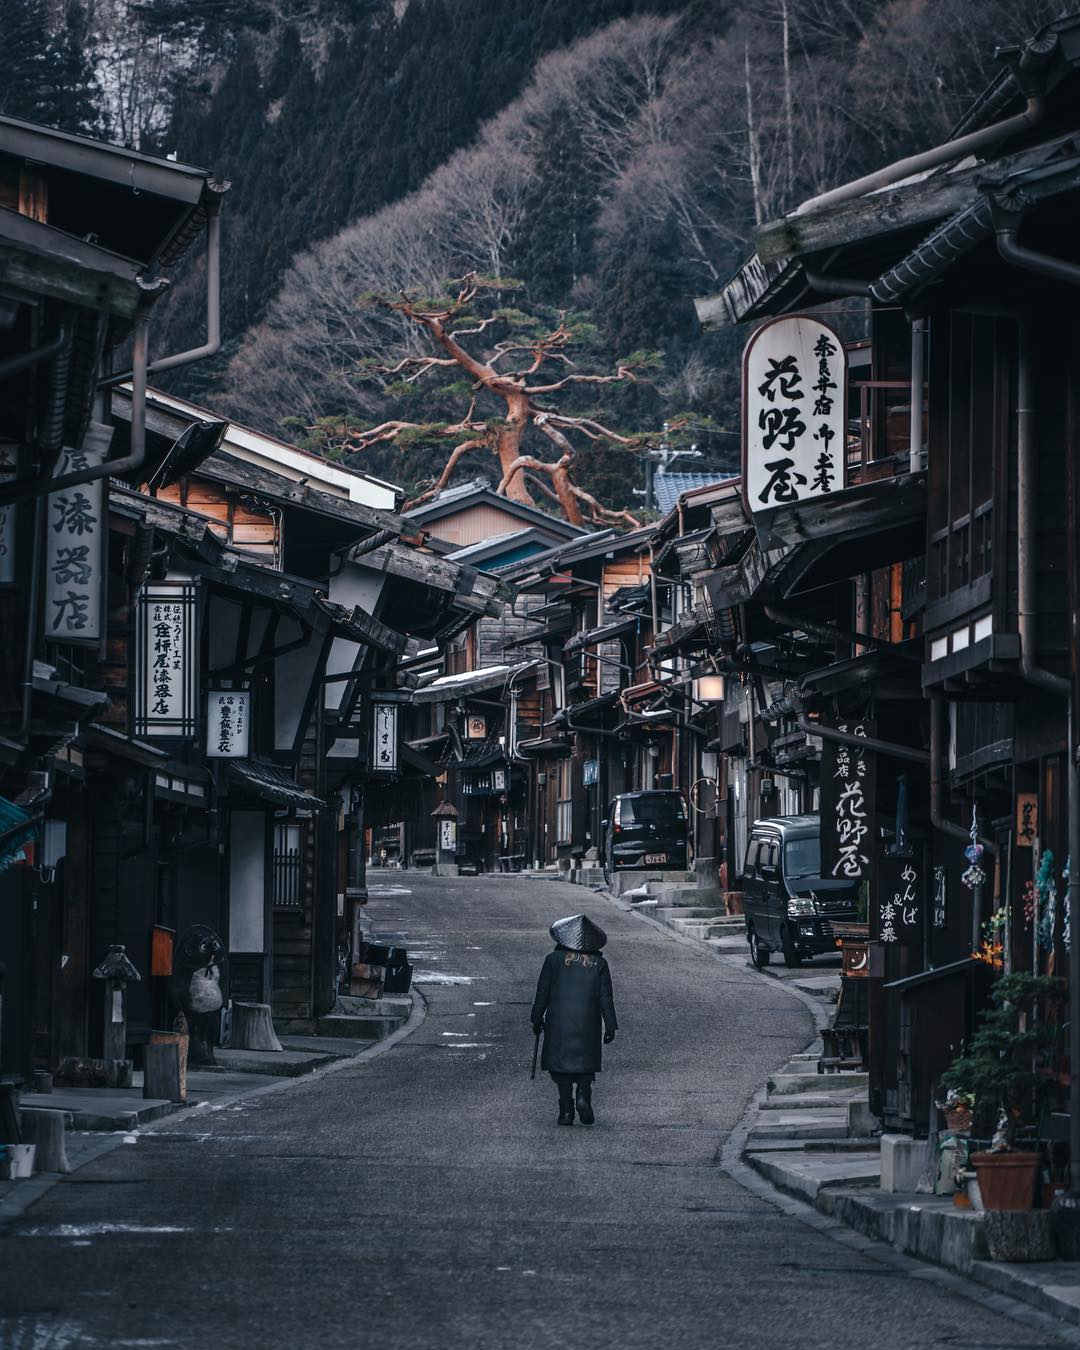 chris Photographer based in Japan Captures the Unique Beauty of Life and Land in East Asia